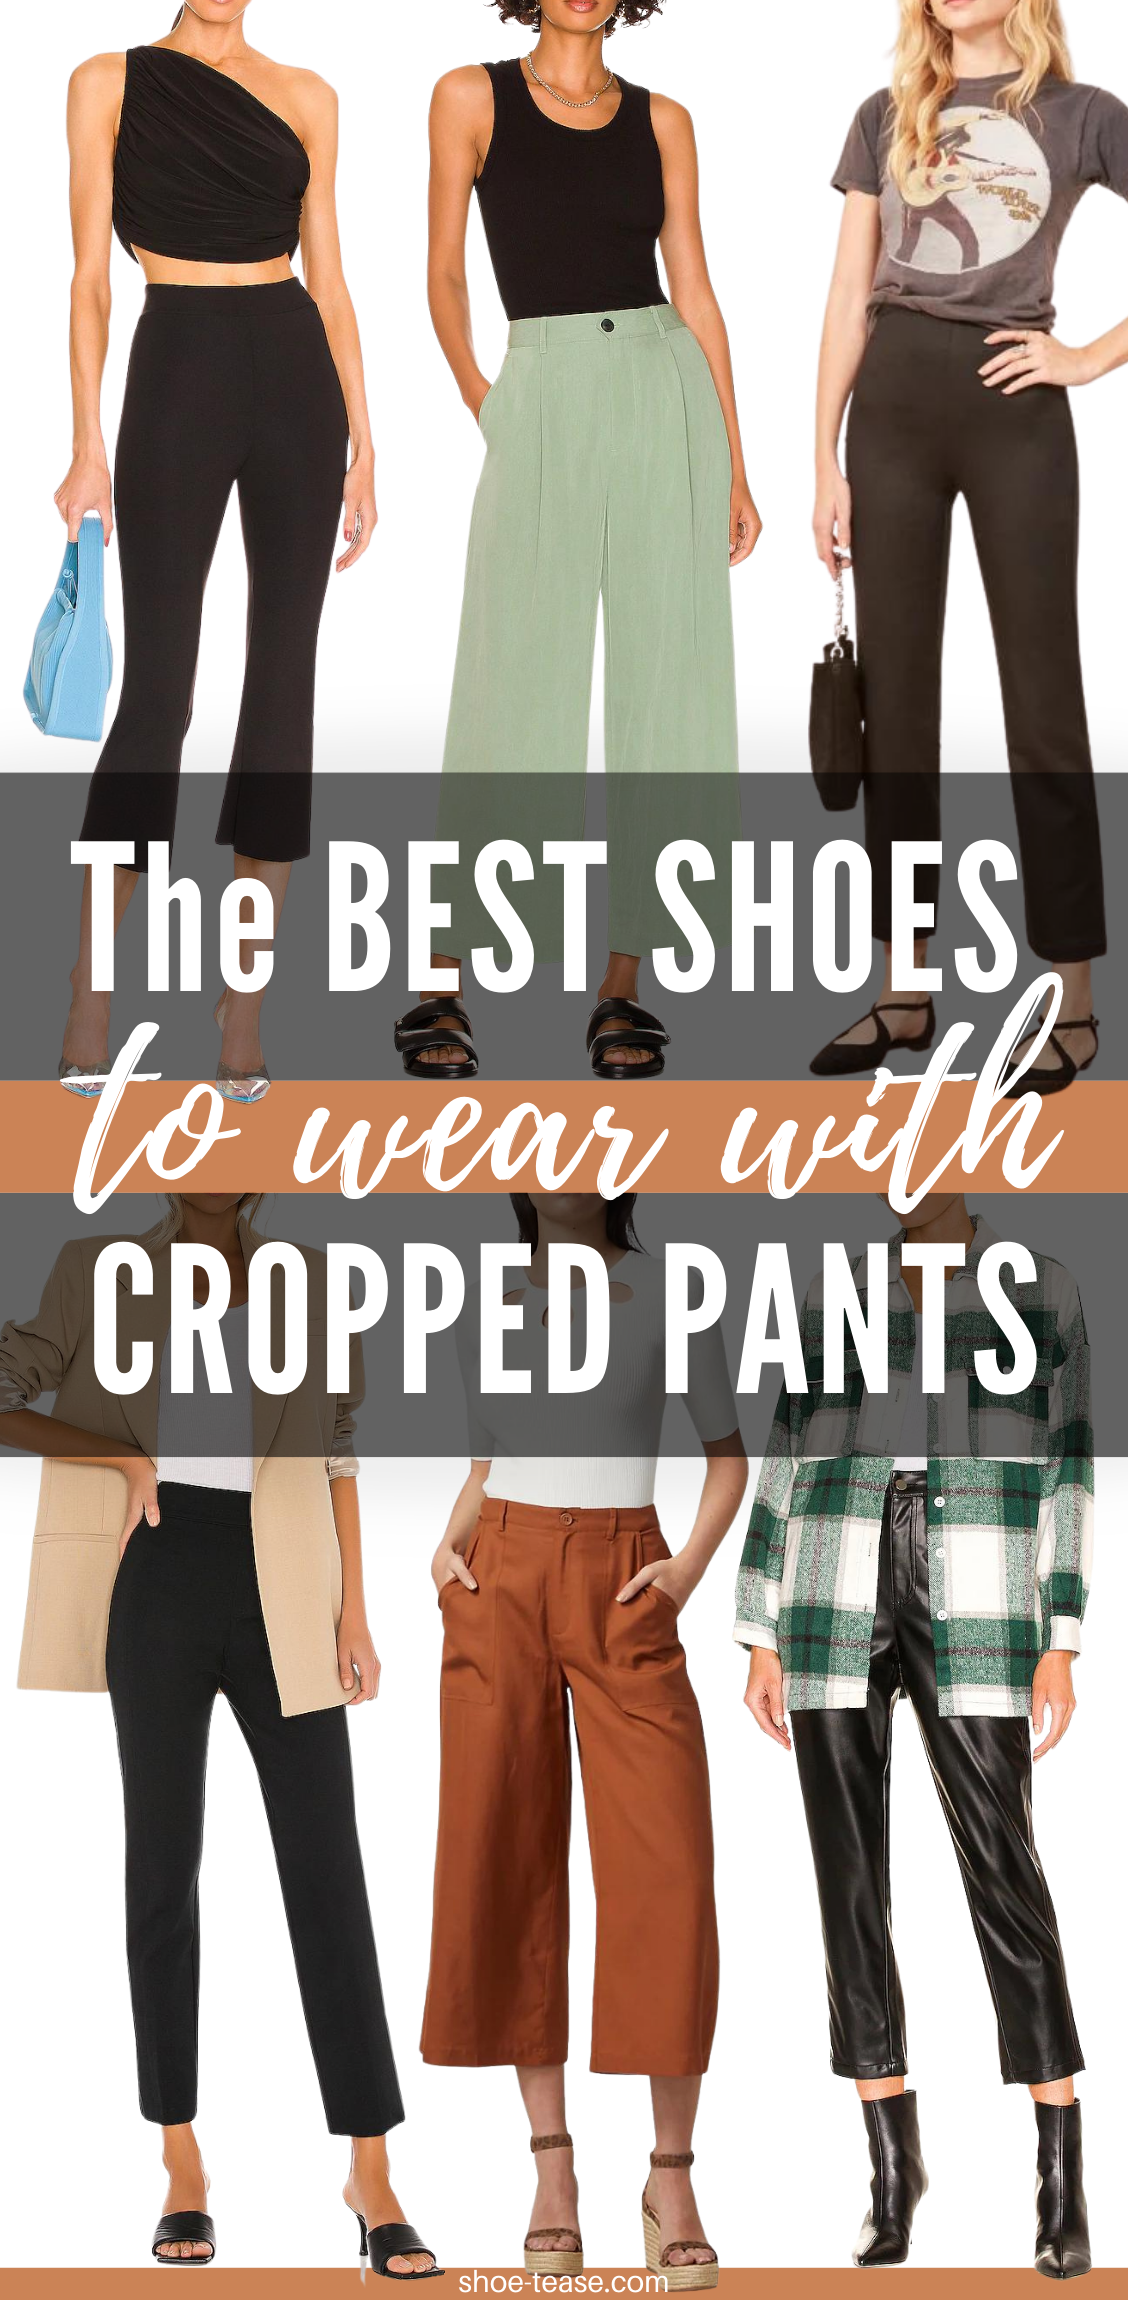 Best Shoes To Wear With Cropped Dress Pants & Capris Story - ShoeTease Shoe  Blog & Styling Services